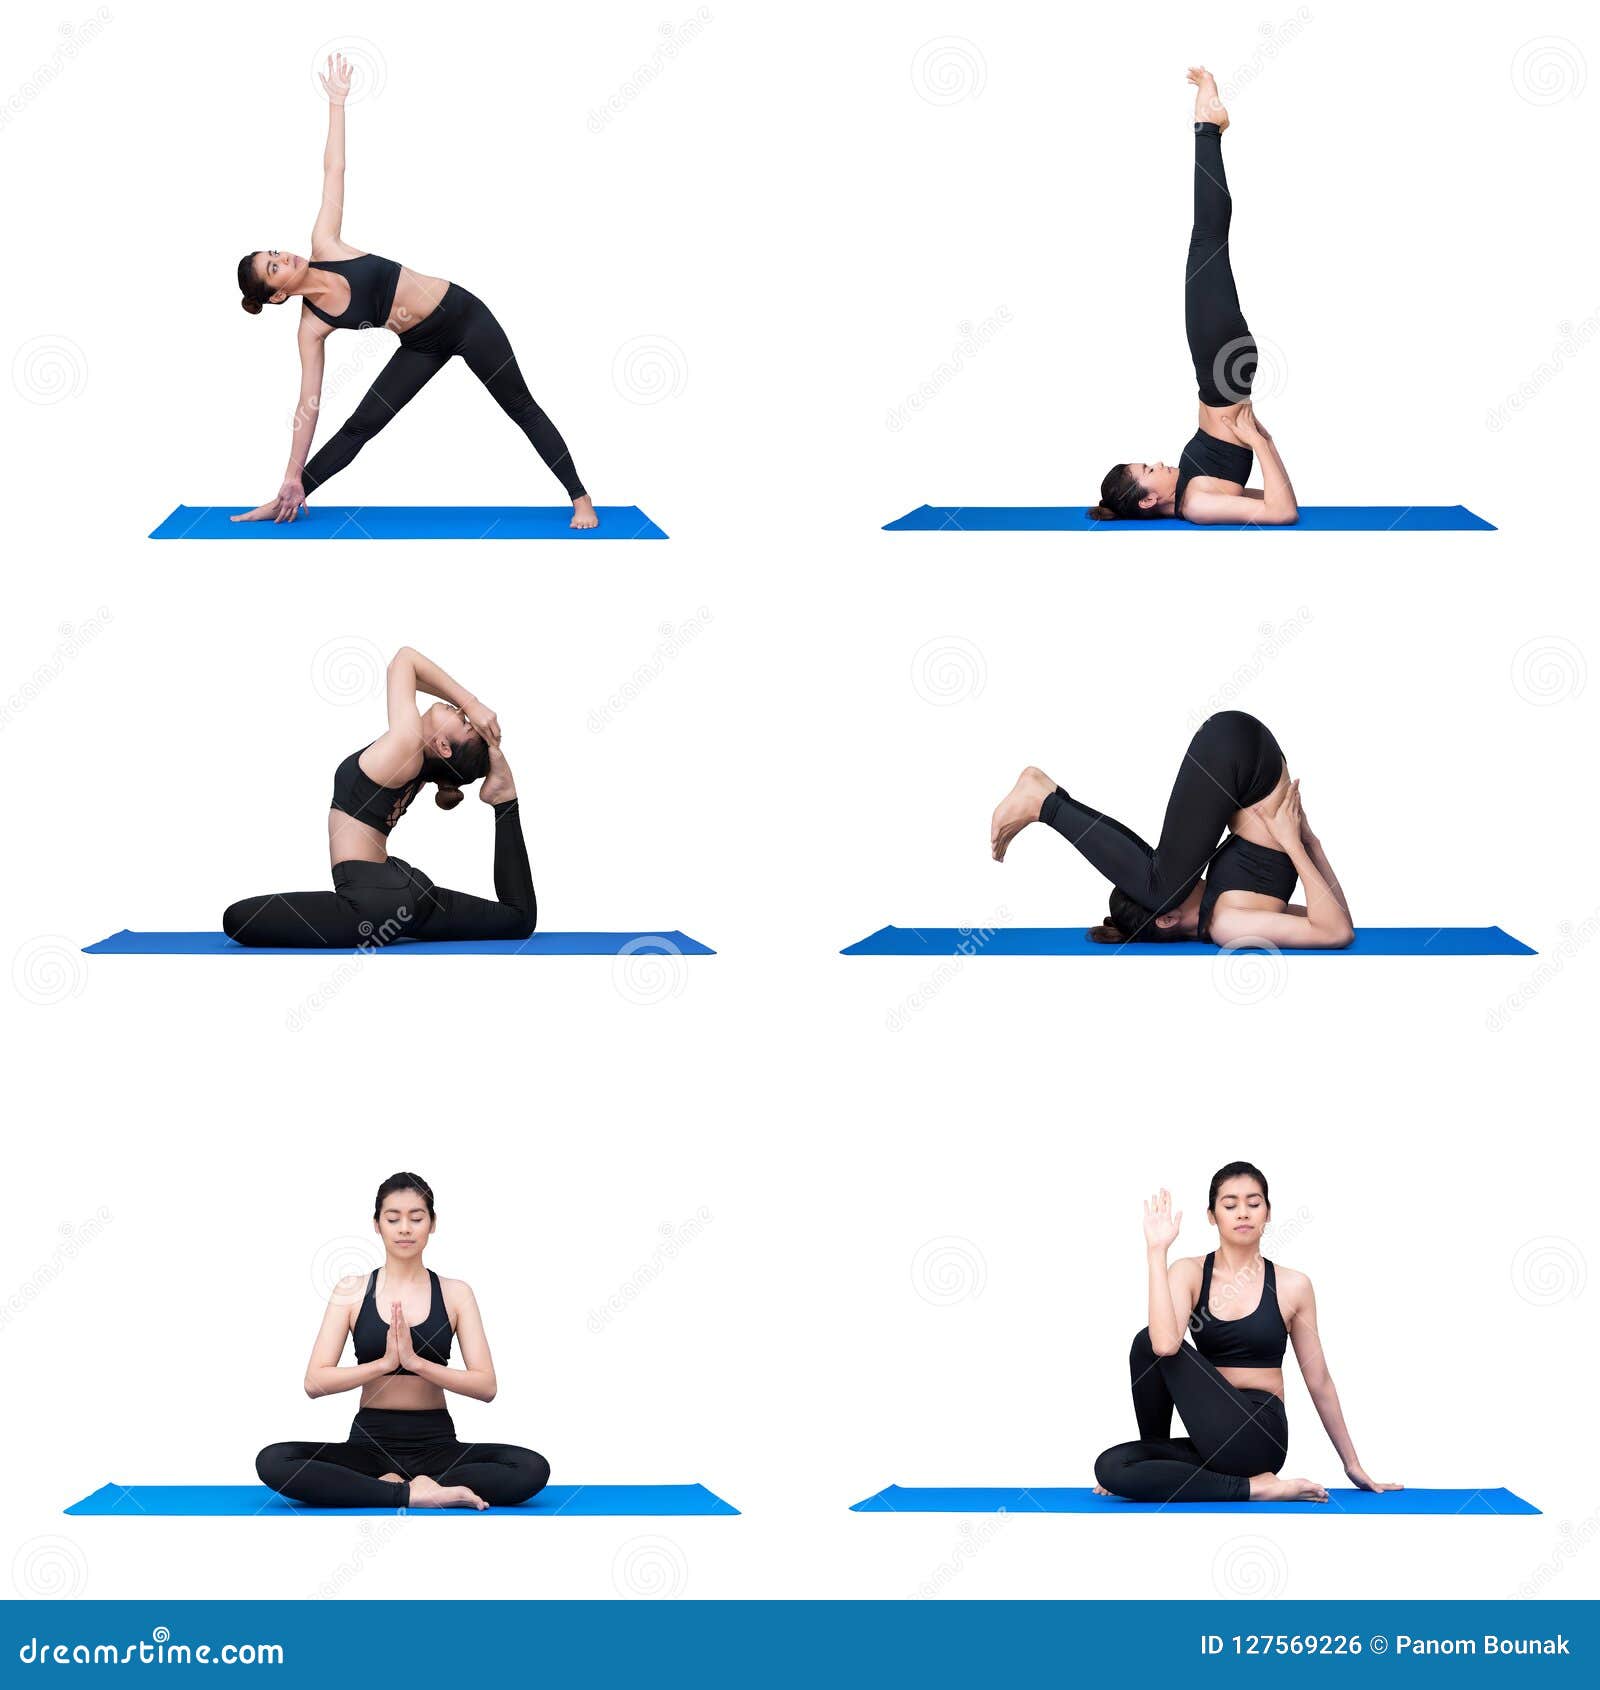 Yoga daily tips and advices - 8 yoga poses to burn lower belly fat ! 😍 |  Facebook